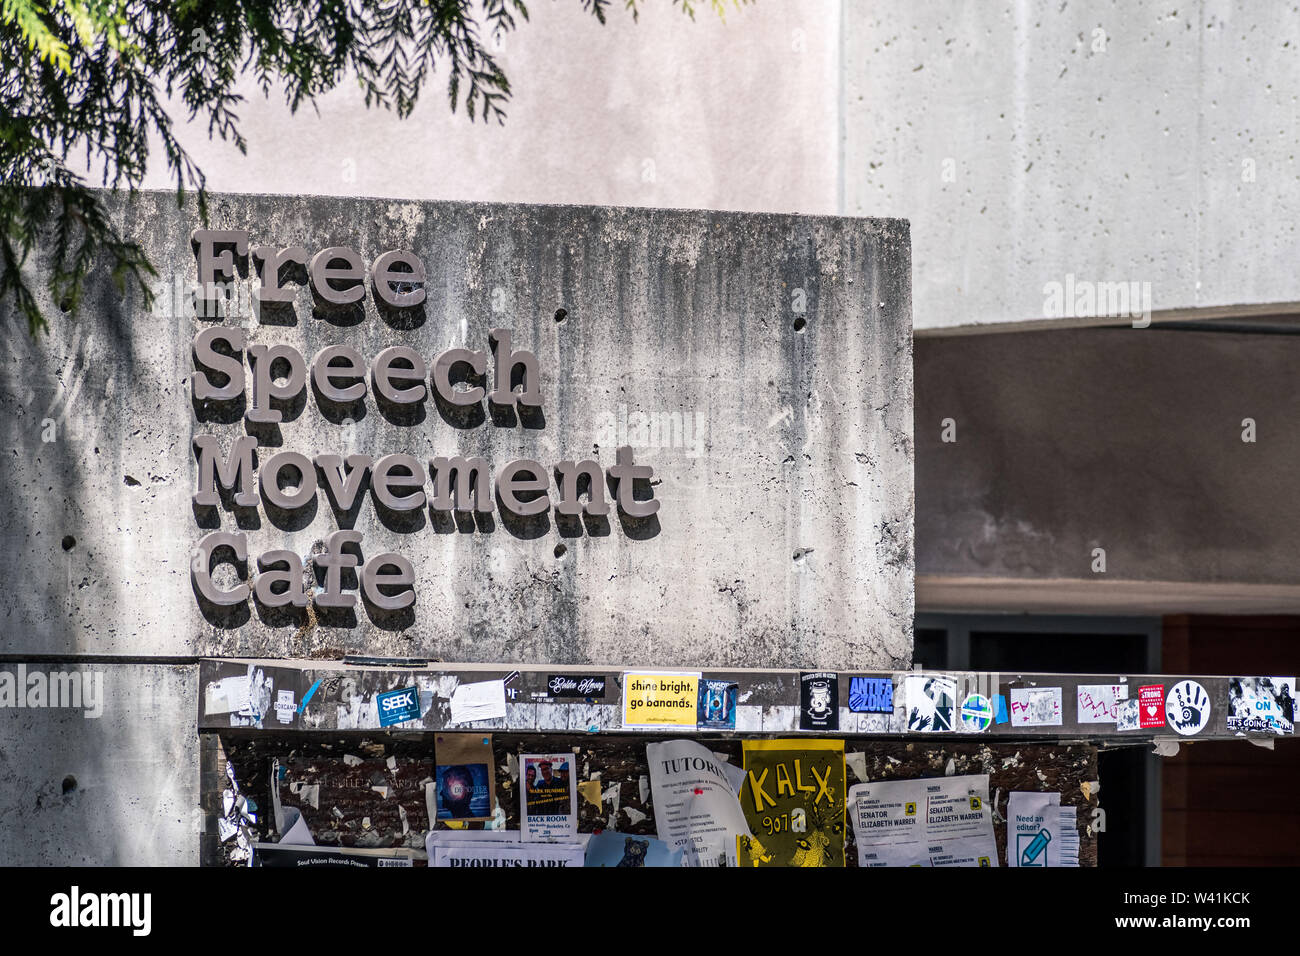 July 13, 2019 Berkeley / CA / USA - The Free Speech Movement Cafe entrance sign, commemoration the Free Speech Movement in the 60's, located in UC Ber Stock Photo